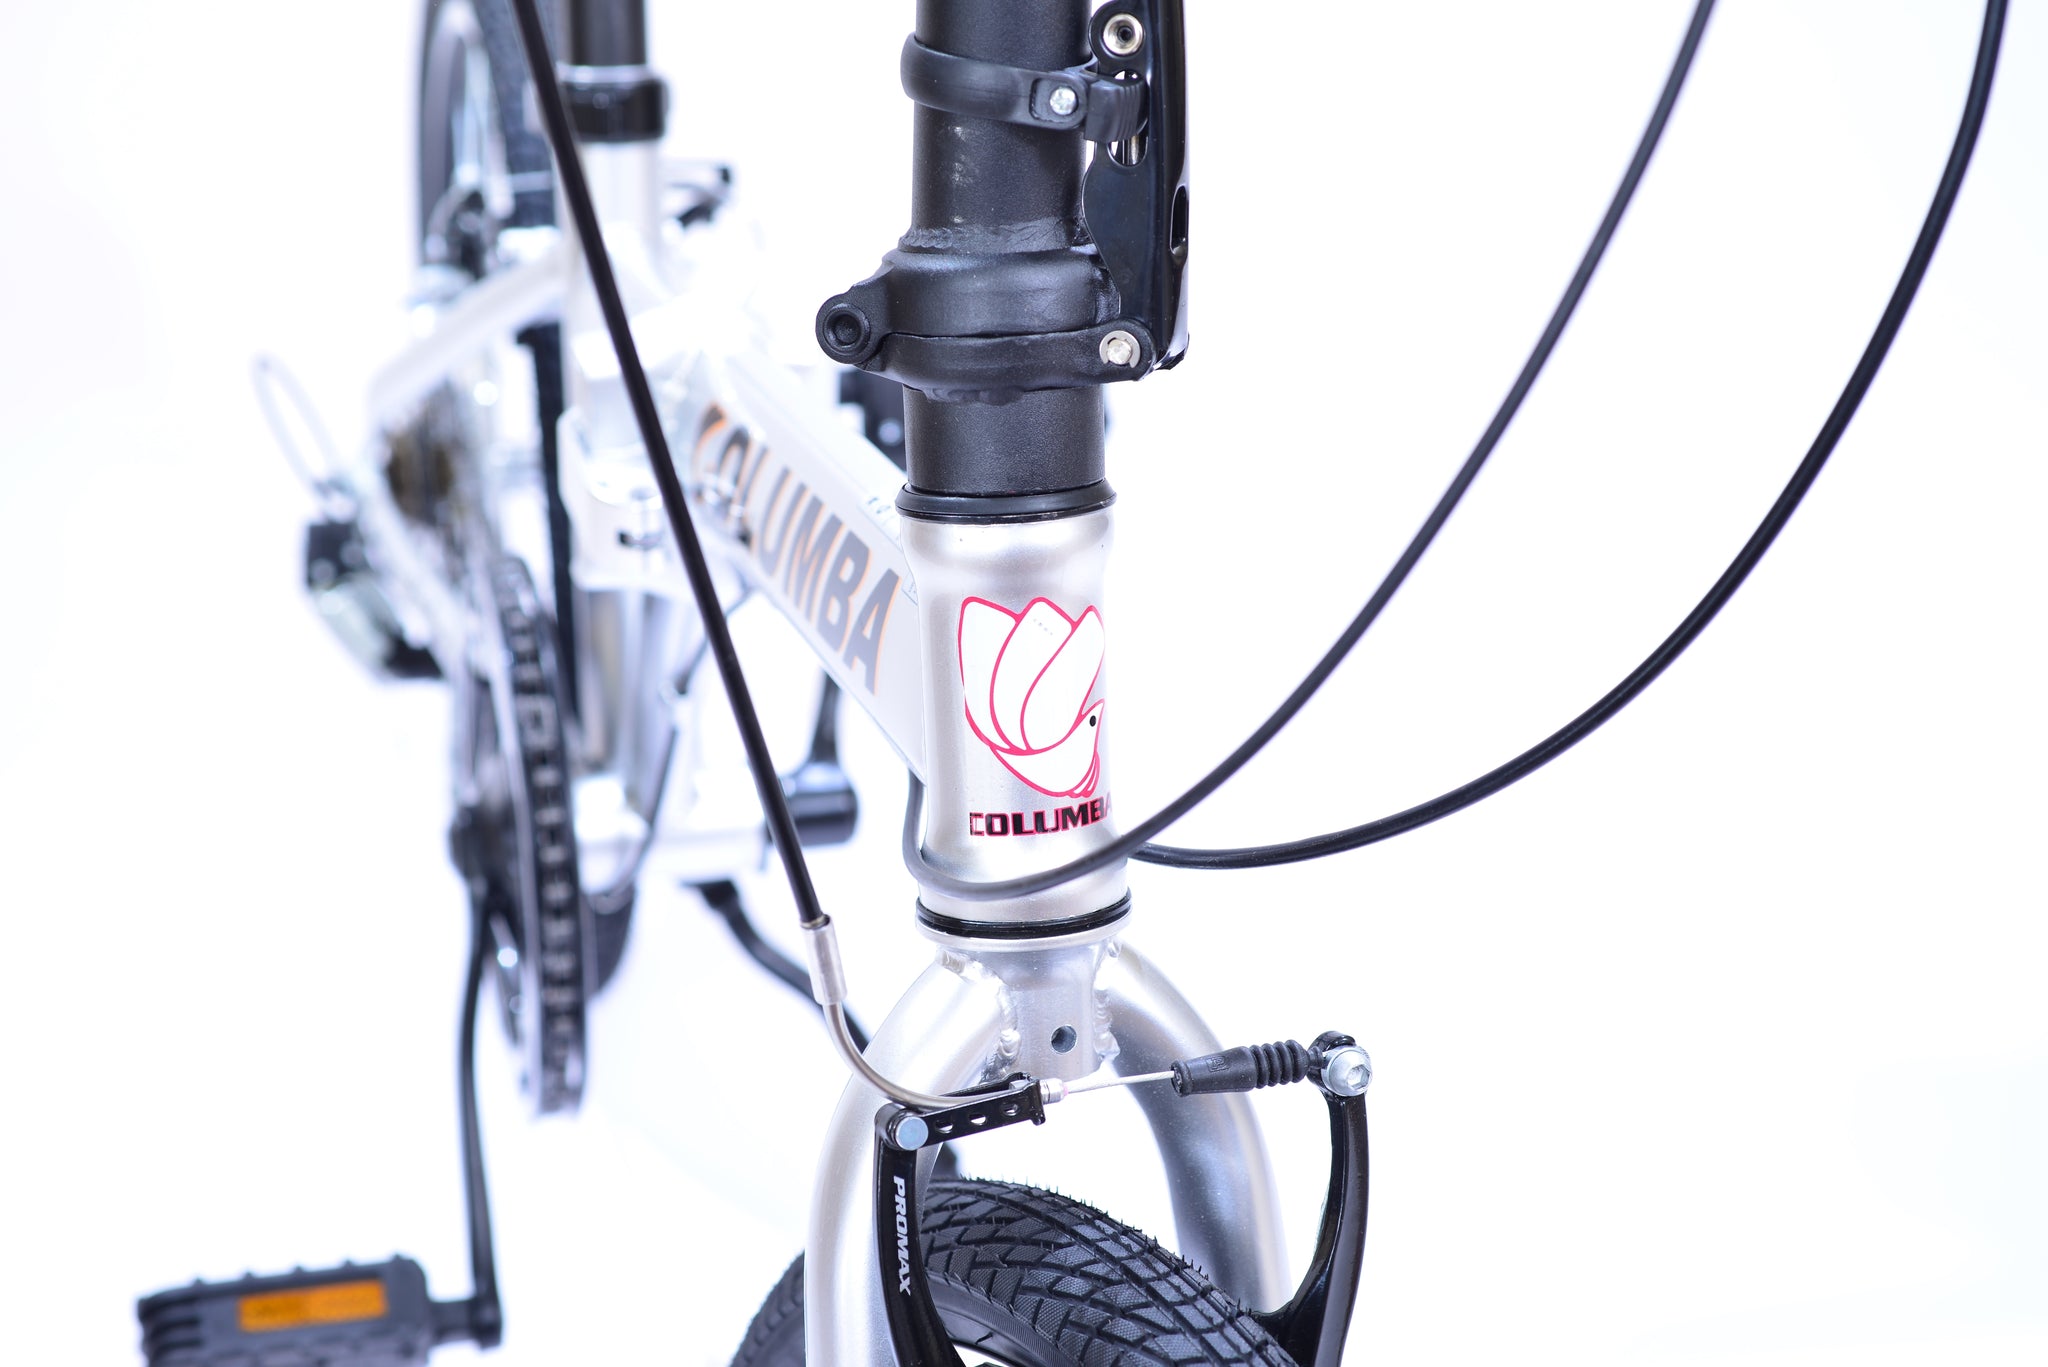 Angled view of the front of a silver bicycle with a red outlined bird icon.